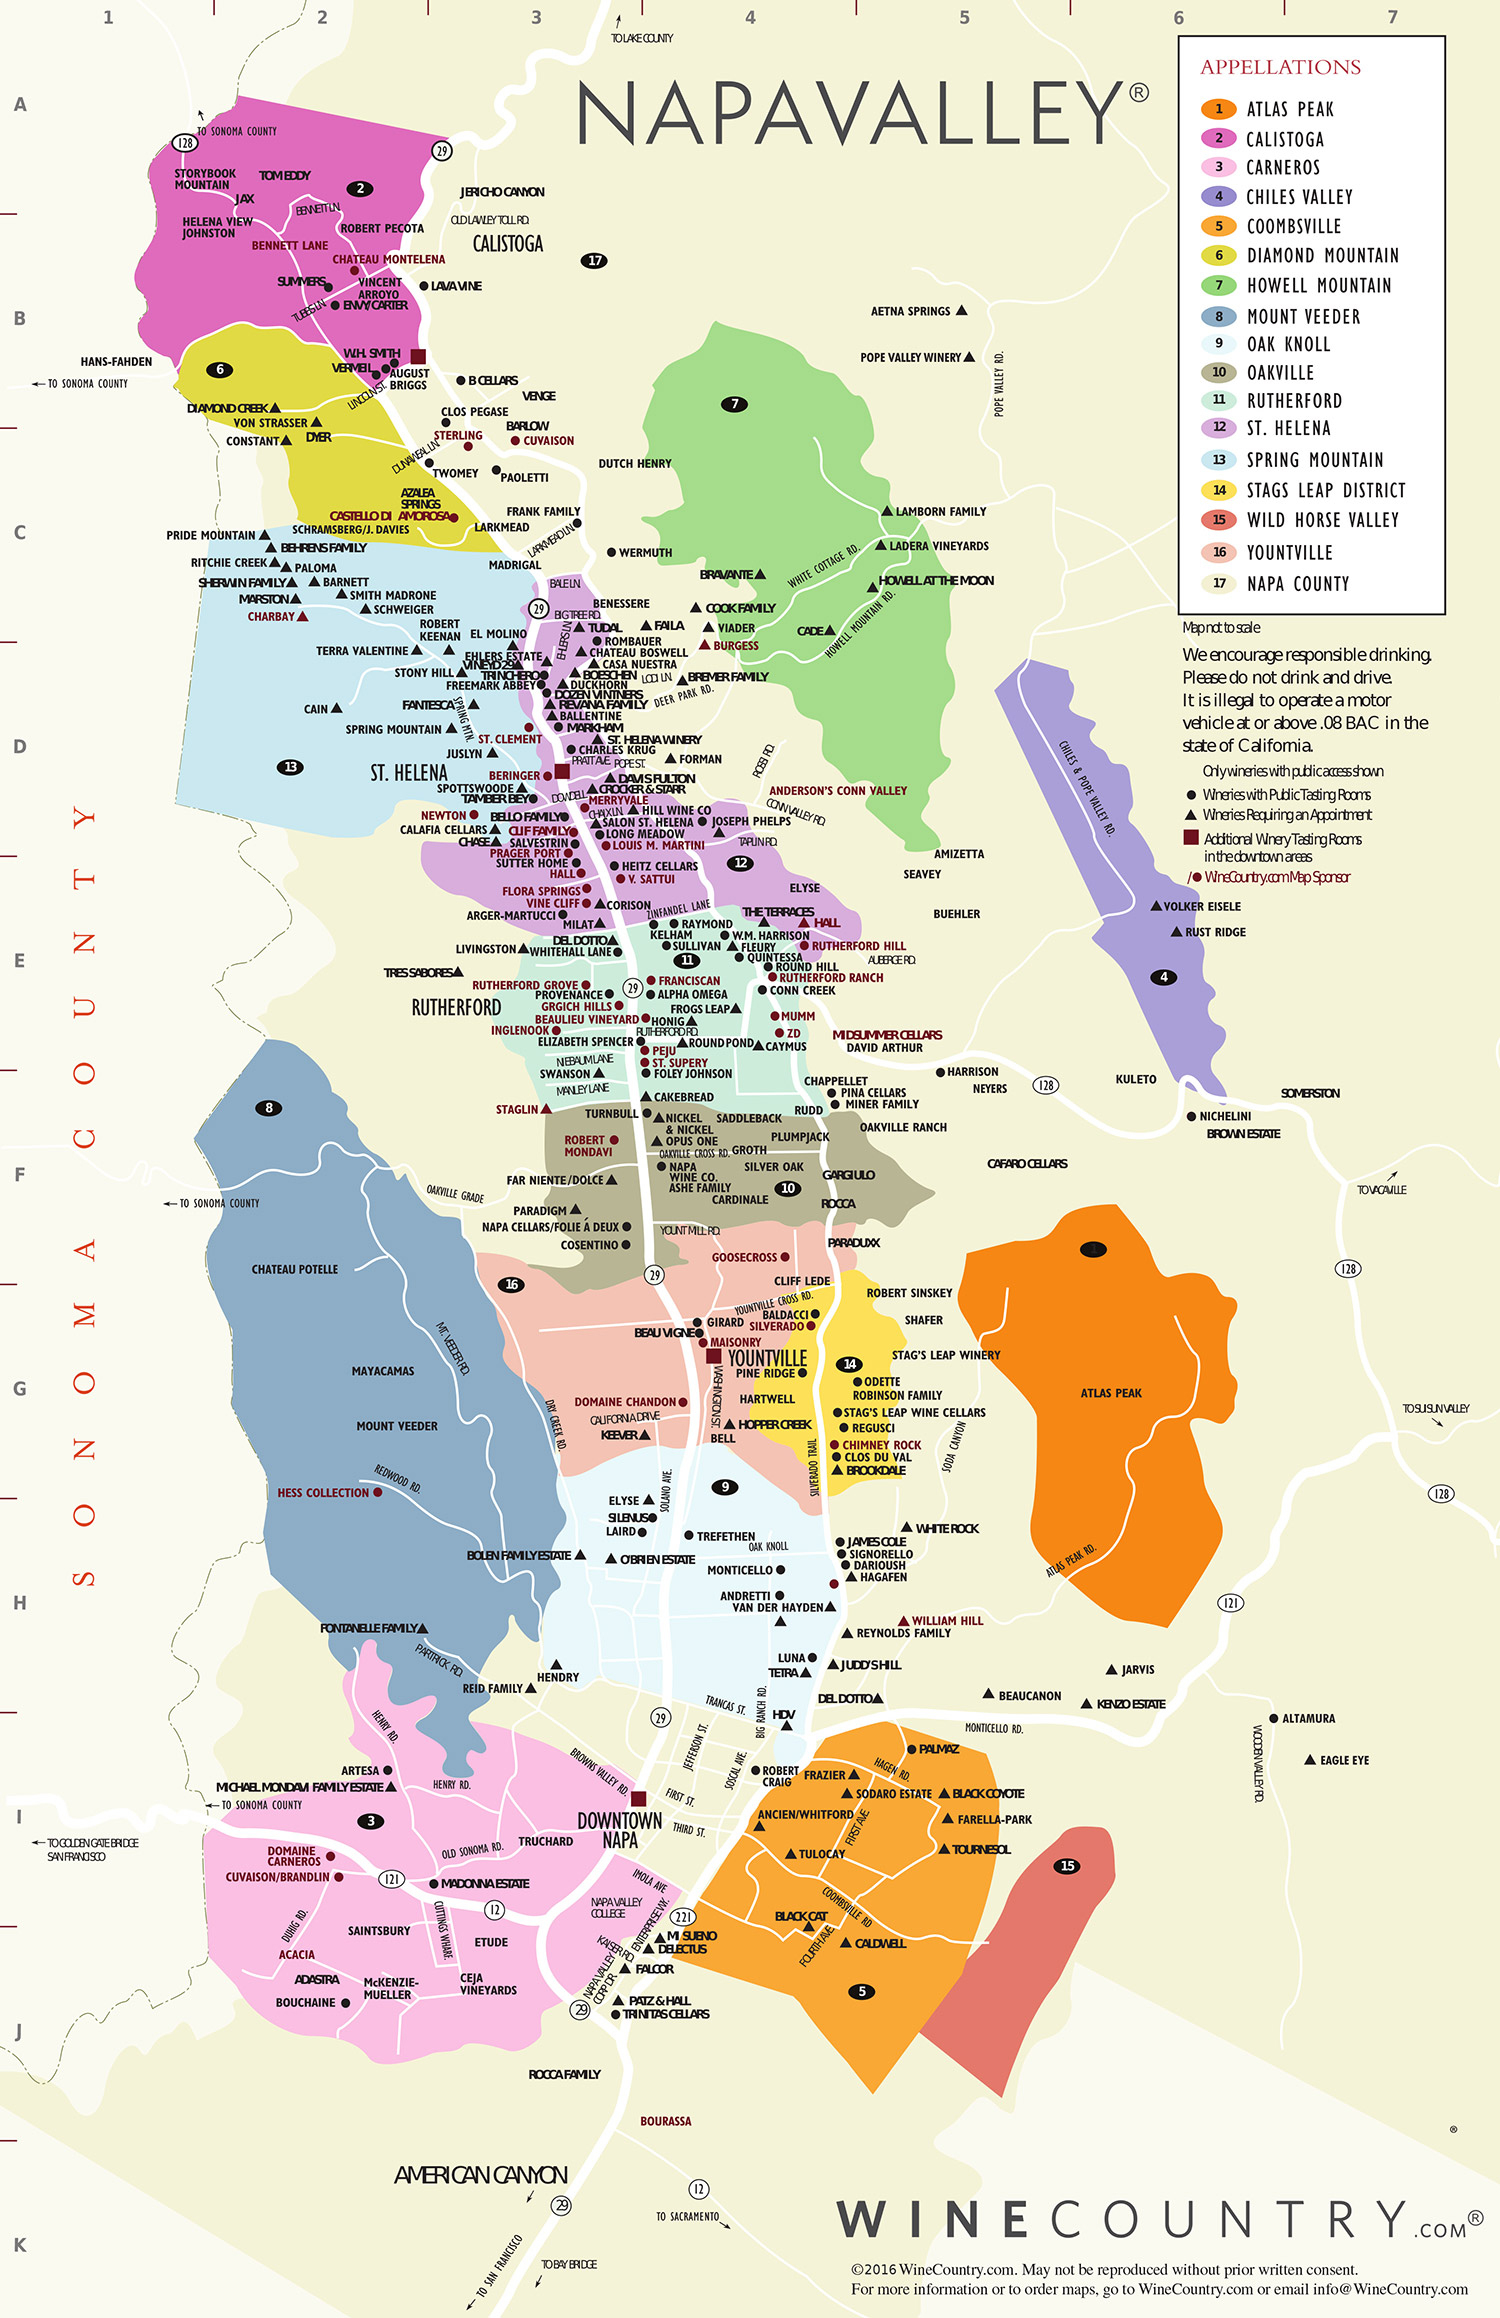 Napa Valley Wine Country Maps - Napavalley - California Wine Tours Map